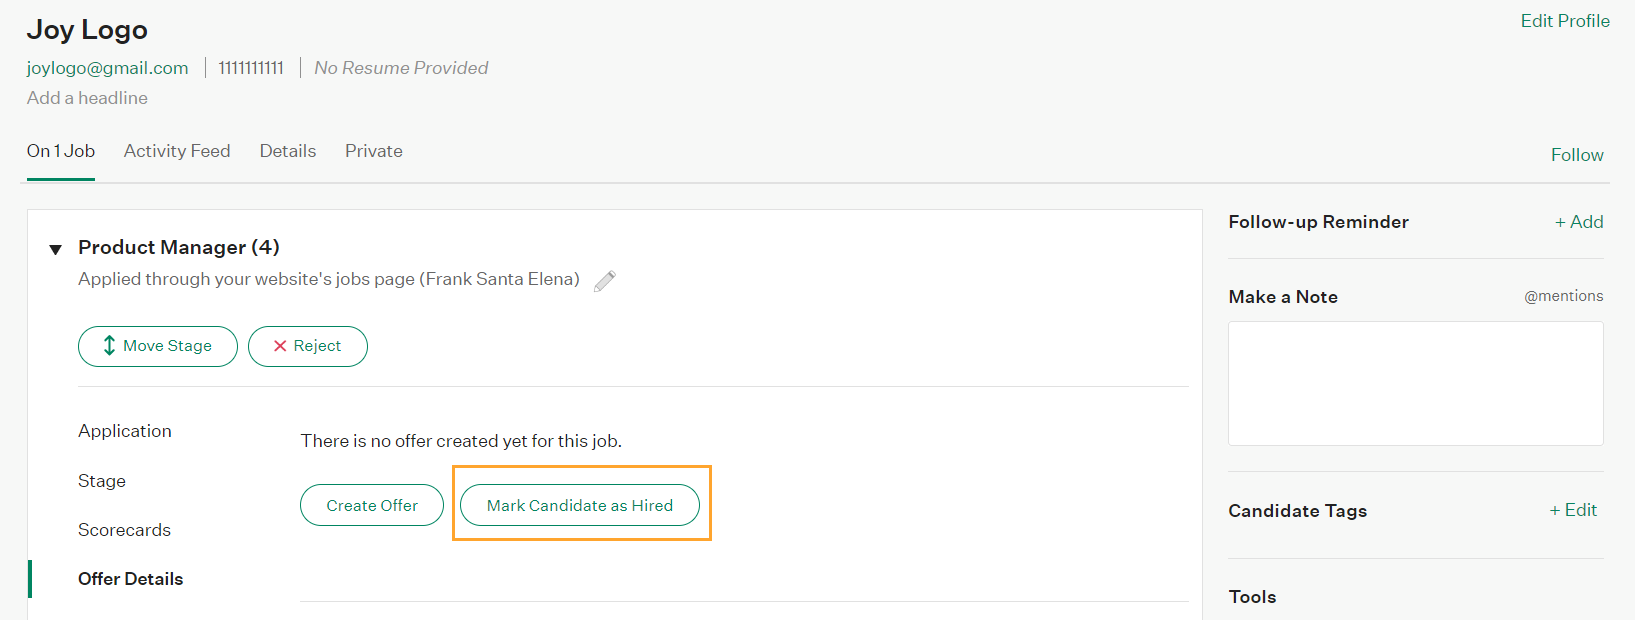 Candidate_job_profile_with_orange_box_highlighting_the_Mark_Candidate_as_Hired_button.png